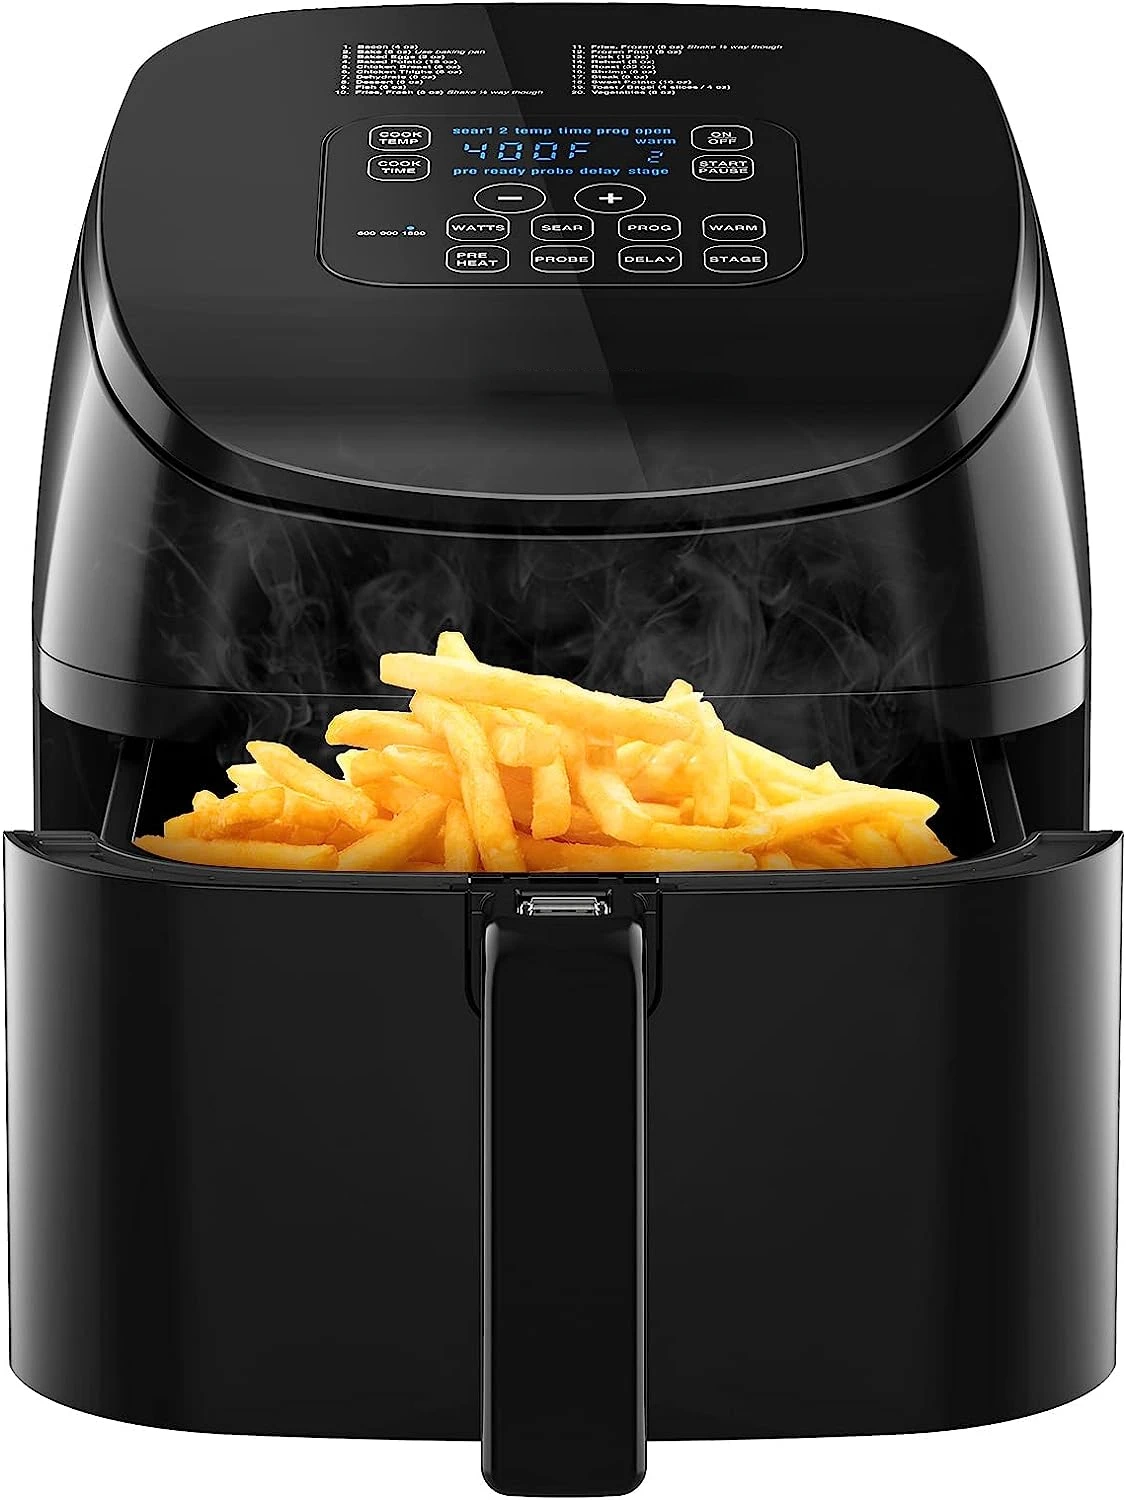 

Air Fryer, 1 Touch Digital Controls, 100°-400°F Temp Controls in 5° Increments, Linear Thermal (Linear T) Technology, 3 Watta